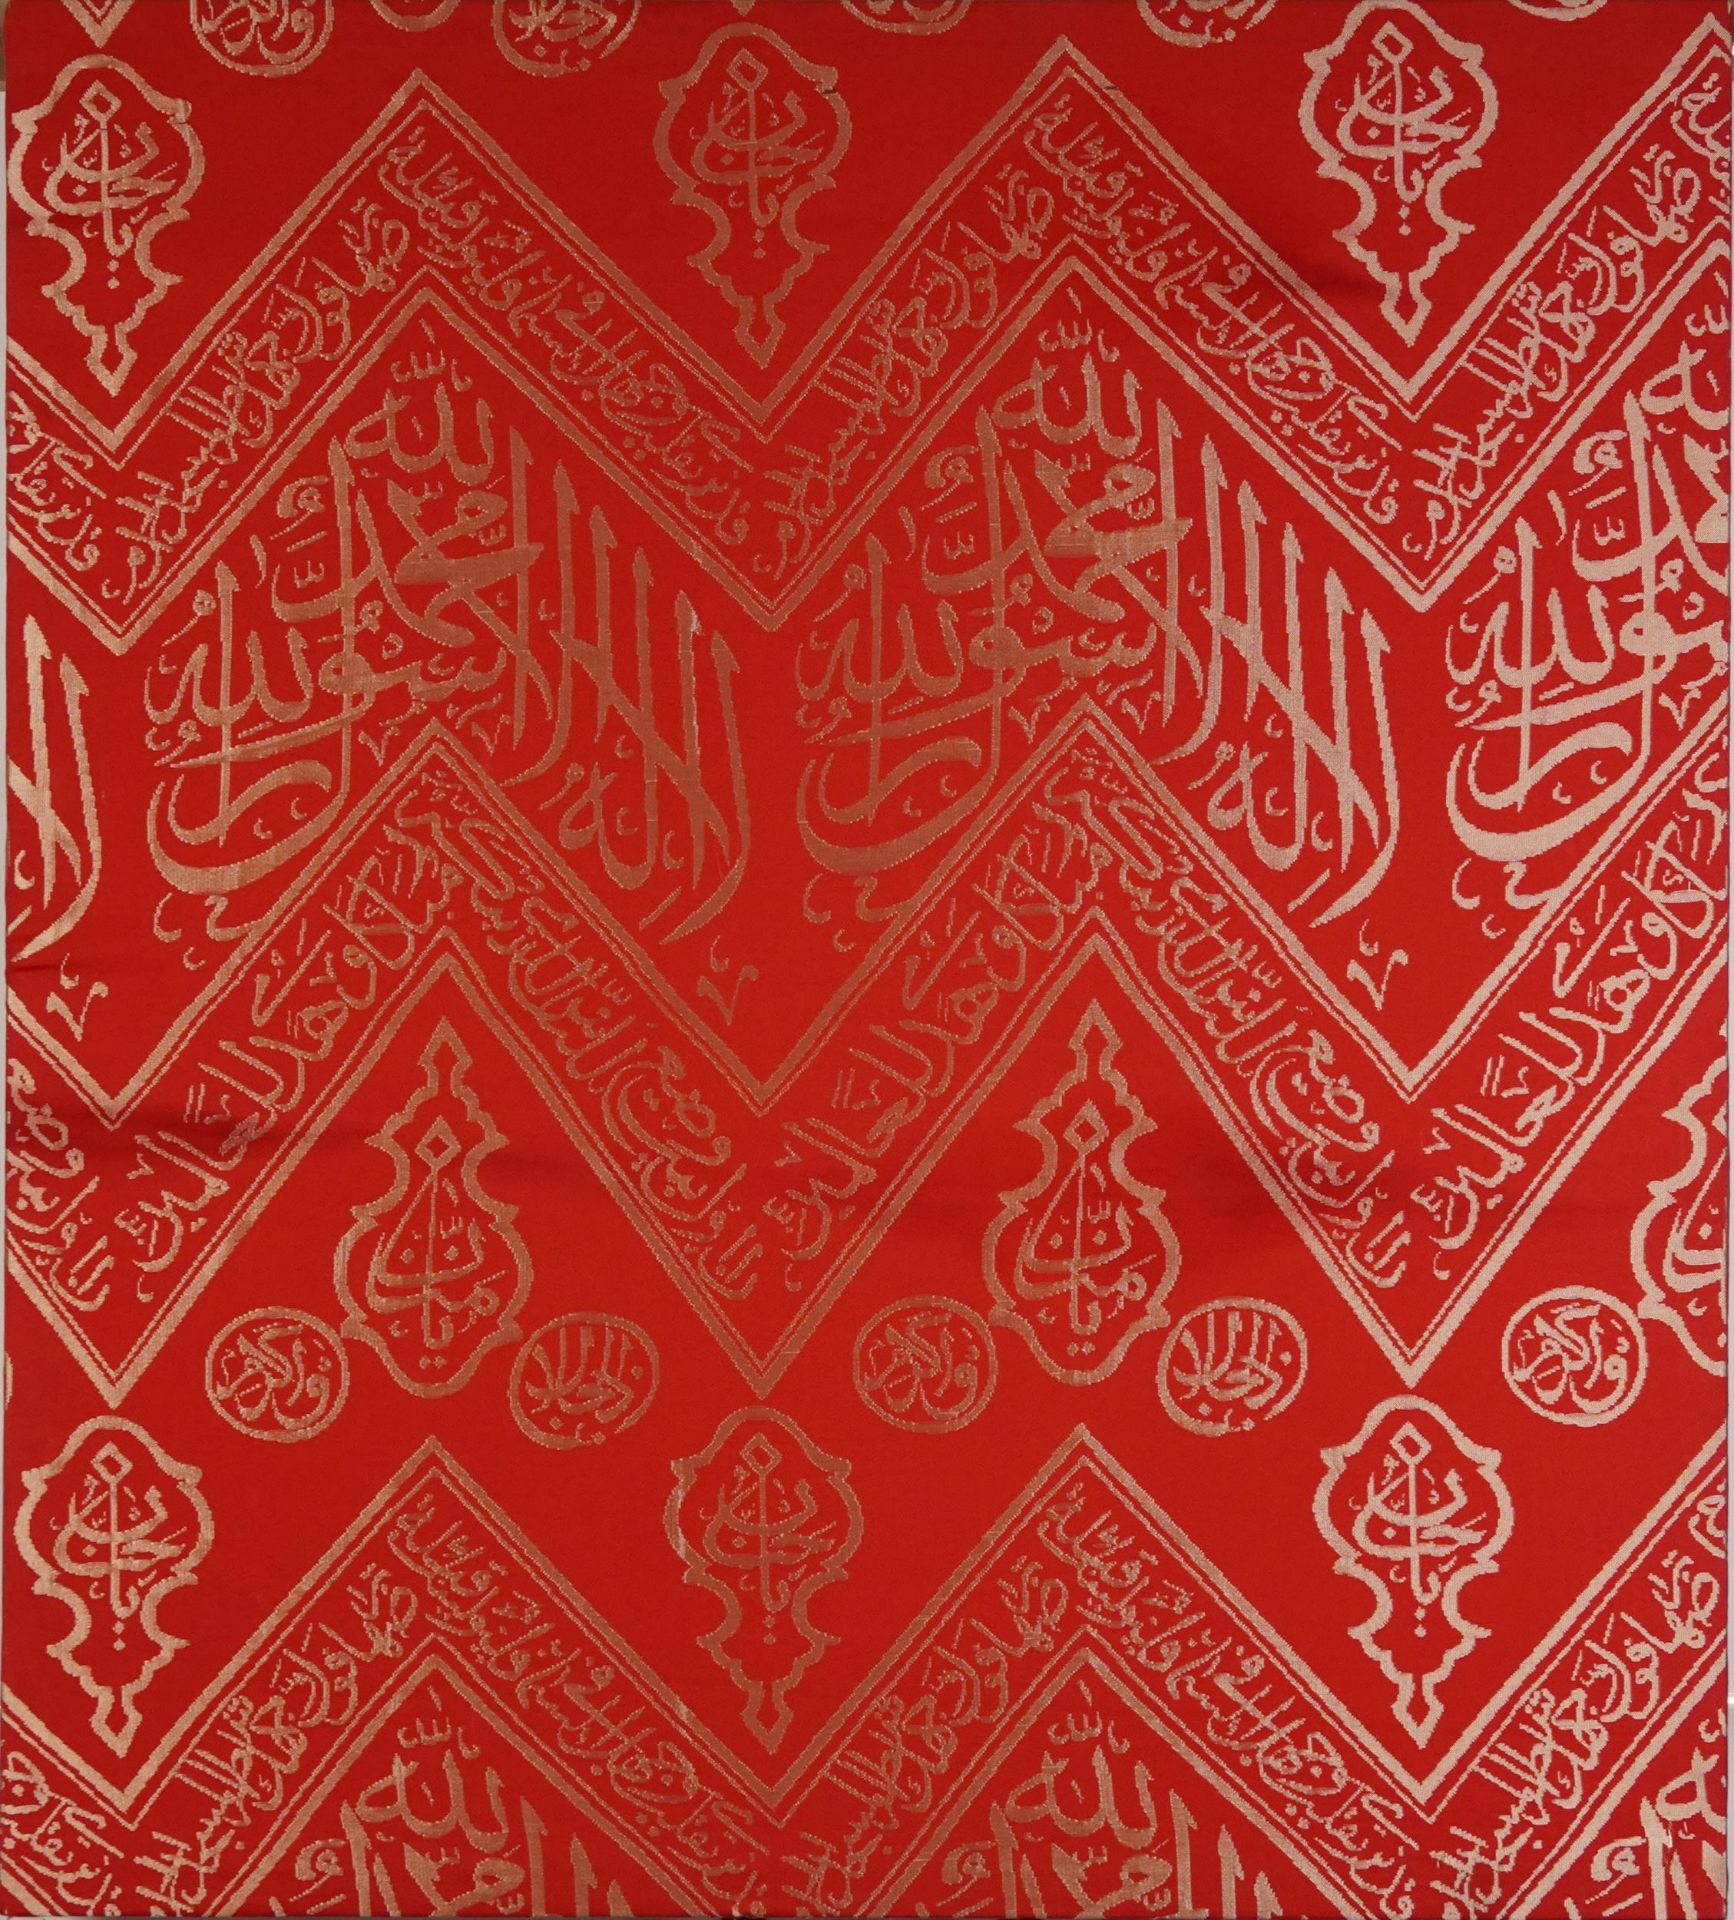 Islamic textile with calligraphy on stretcher, 106cm x 95cm : For further information on this lot